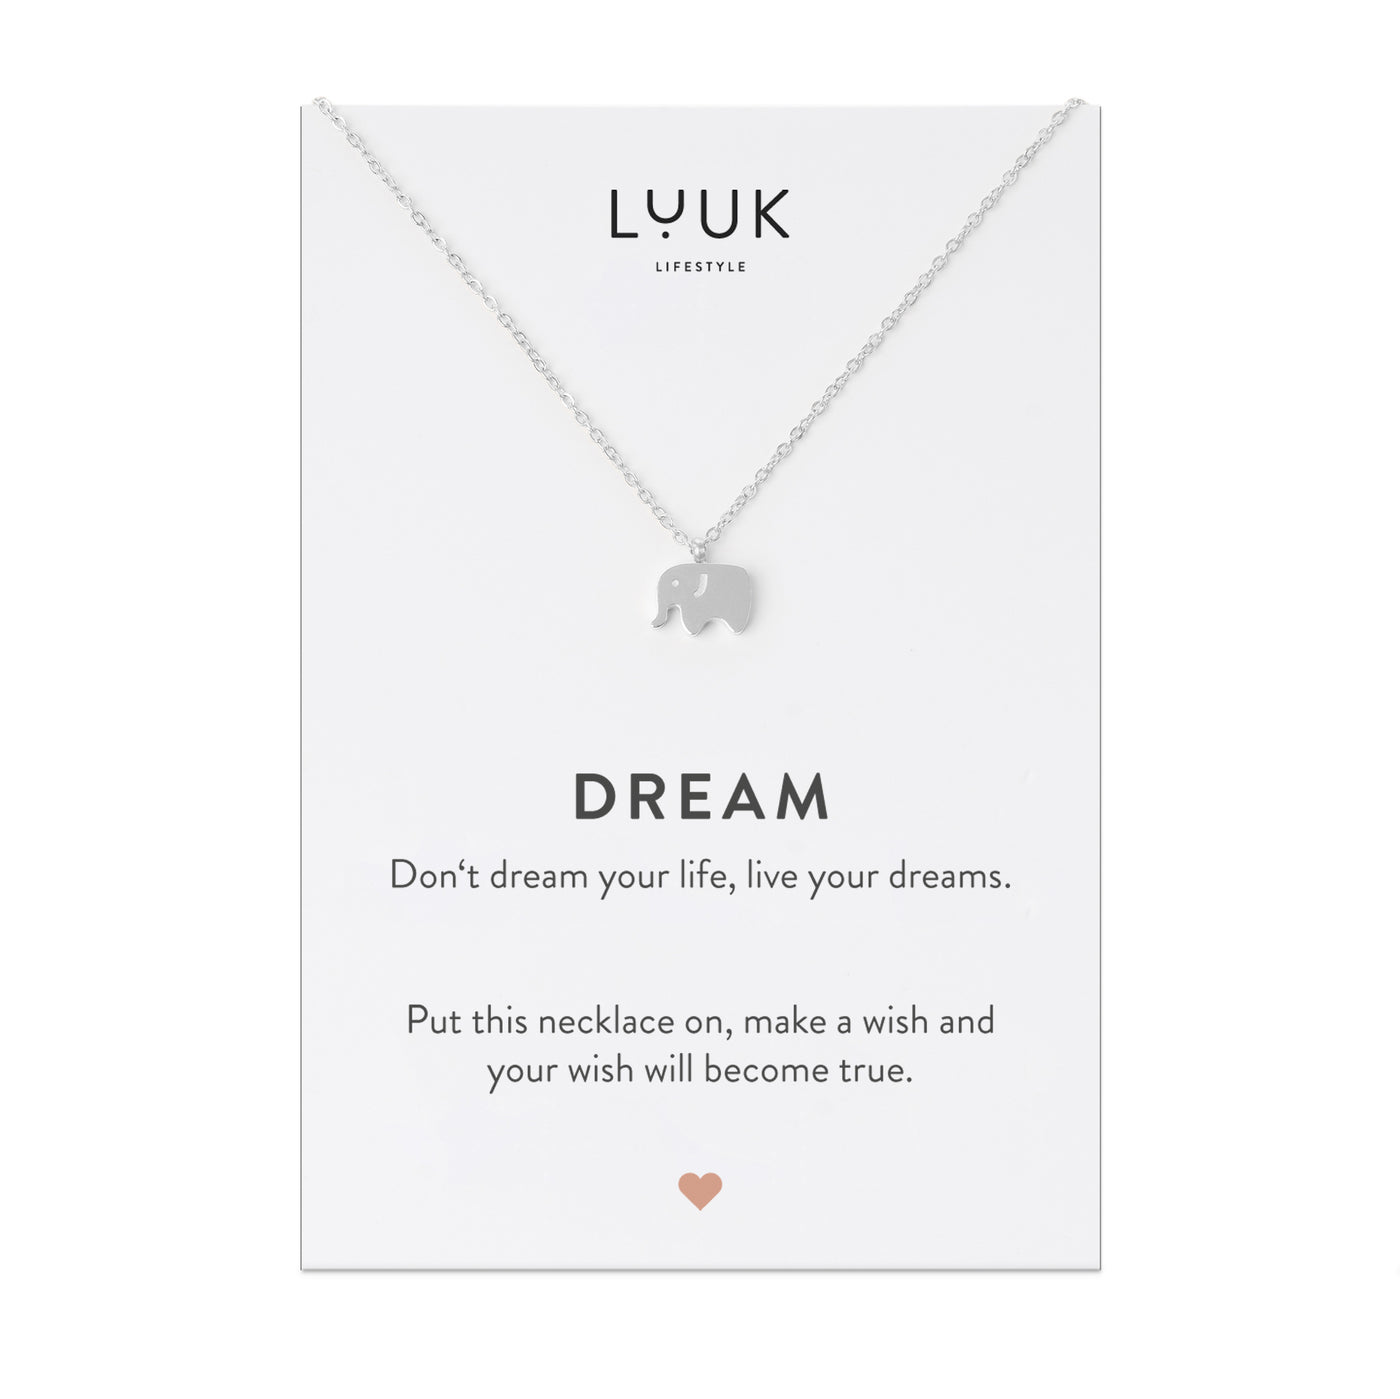 Necklace with elephant pendant and Dream greeting card